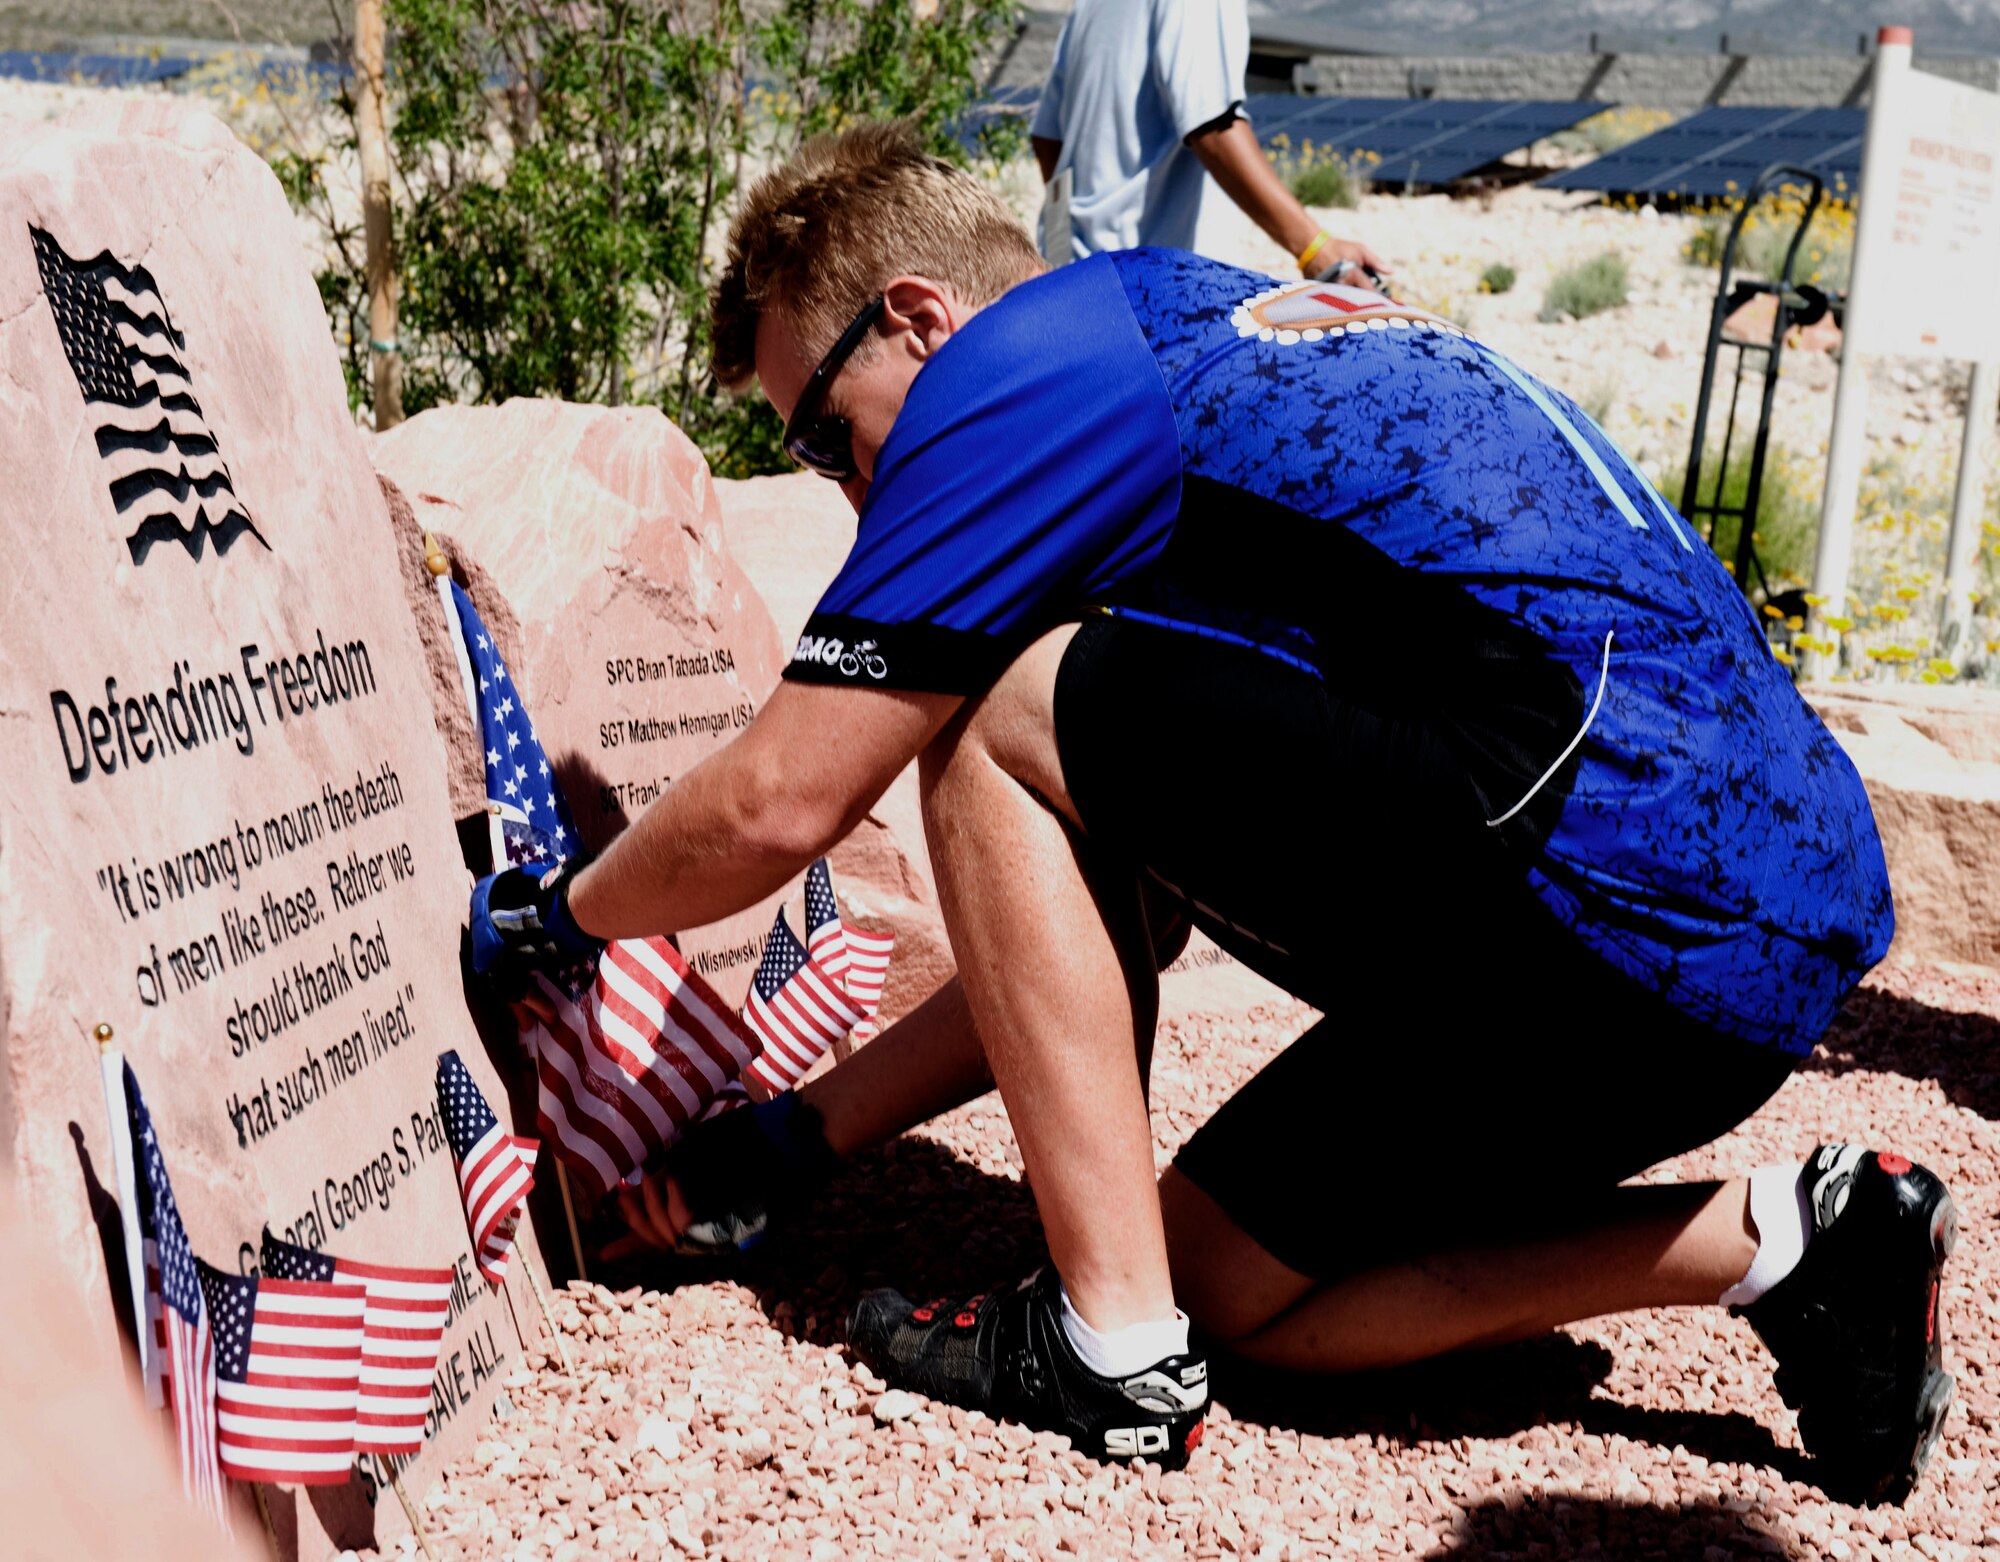 LAS VEGAS -- A bicyclist places a flag at the foot of the Defending Freedom Memorial at Red Rock National Conservation Area, Las Vegas, May 14. The Defending Freedom Memorial honors fallen servicemembers with ties to Nevada and provides a forum for the community to express its appreciation for this sacrifice. The Defending Freedom Memorial was initially dedicated in 2005 and is comprised of seven sandstones with the engraved names of Nevada's fallen servicemen and women.  (U.S. Air Force photo by Airman 1st Class Jamie L. Nicley)